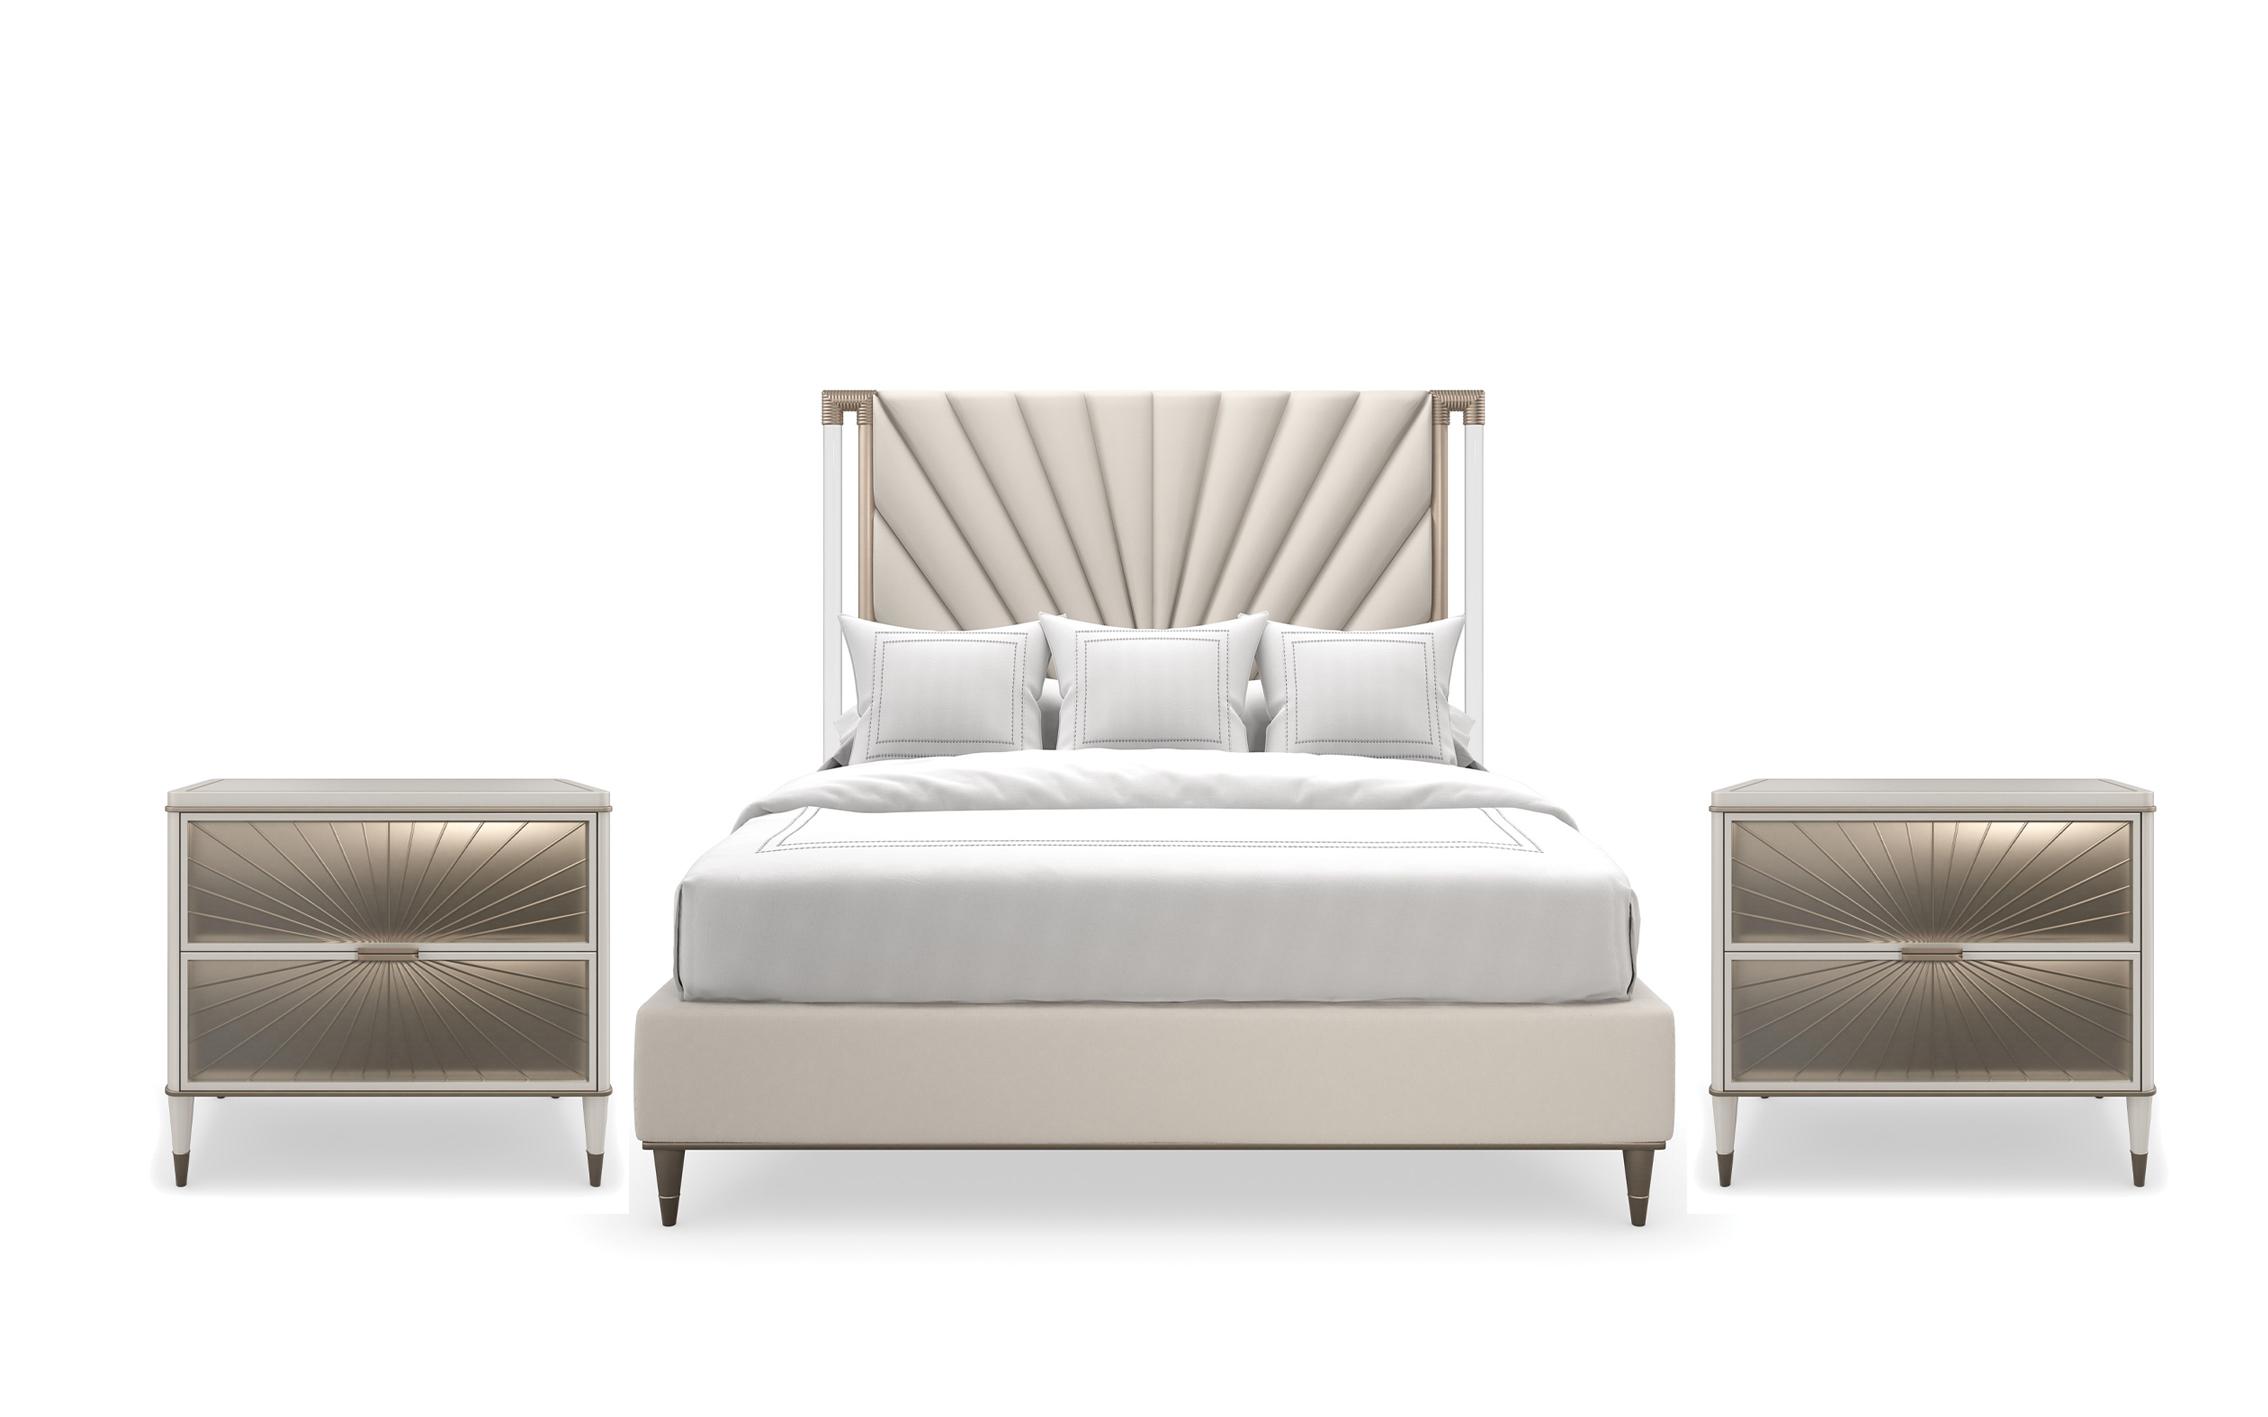 Contemporary Platform Bedroom Set VALENTINA UPH QUEEN BED / VALENTINA SMALL NIGHTSTAND C113-422-101-Set-3 in Pearl, Gold Fabric